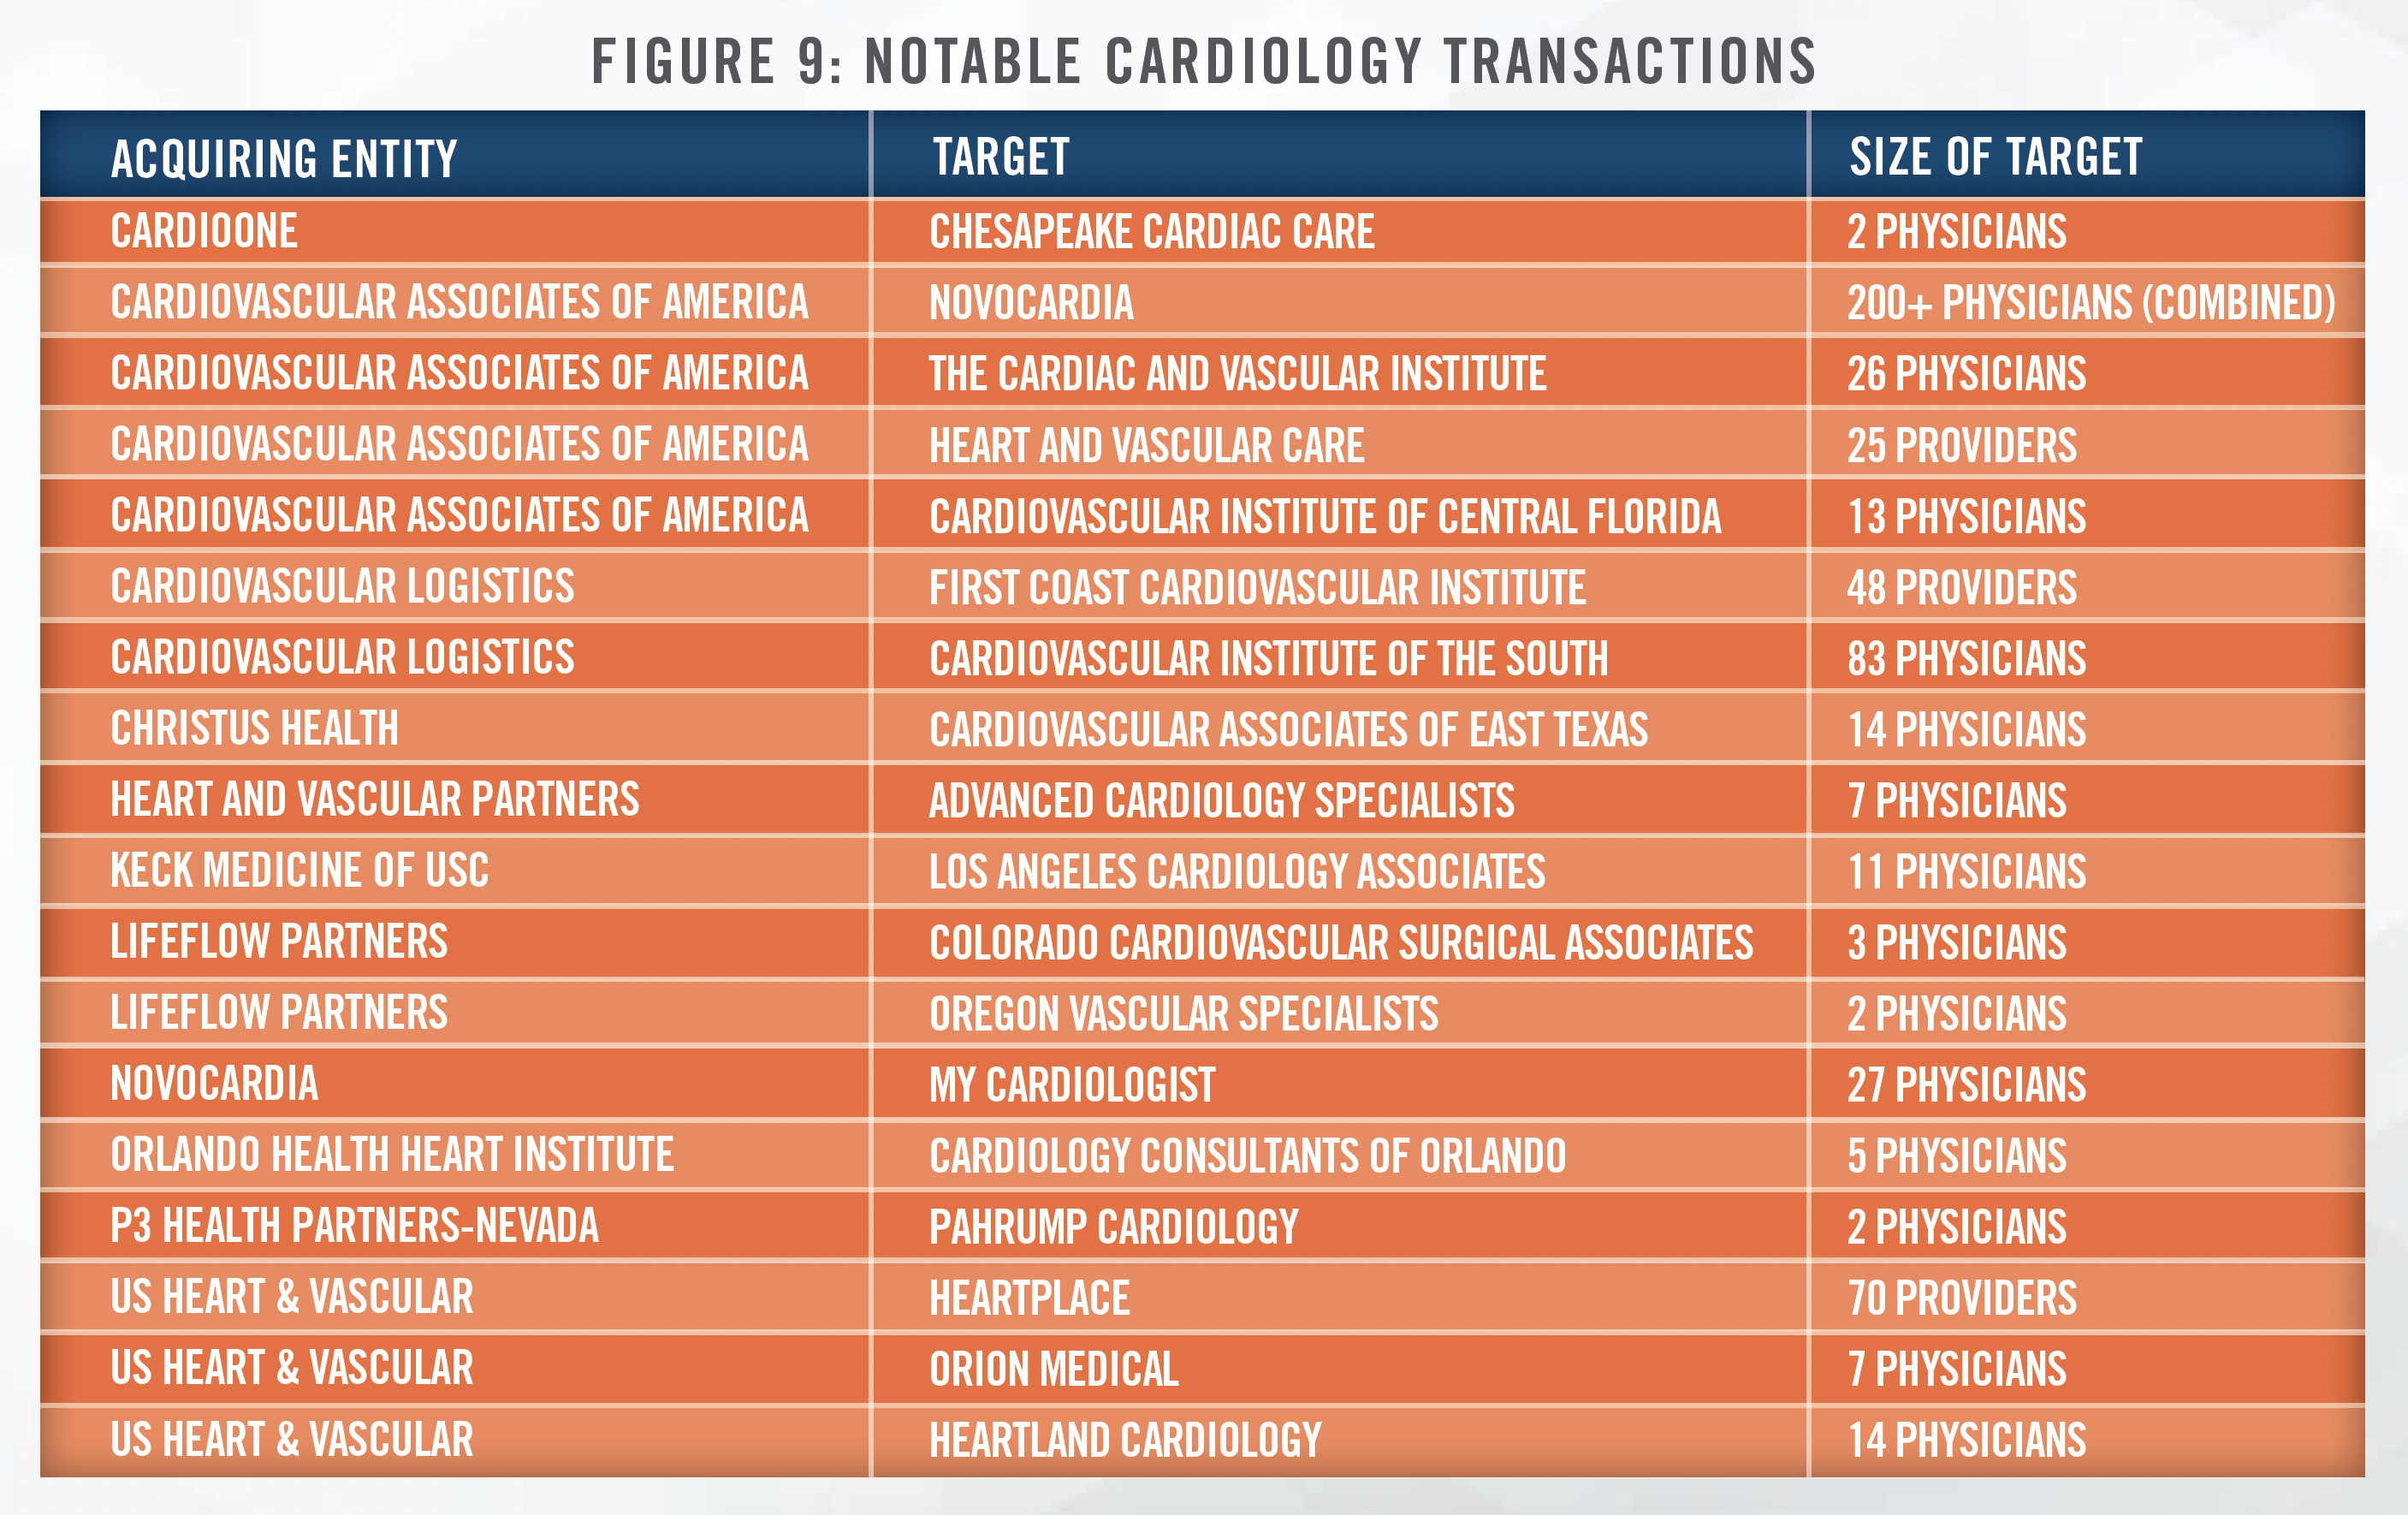 2023 Cardiology Industry Outlook - A Reviving Heartbeat Figure 9